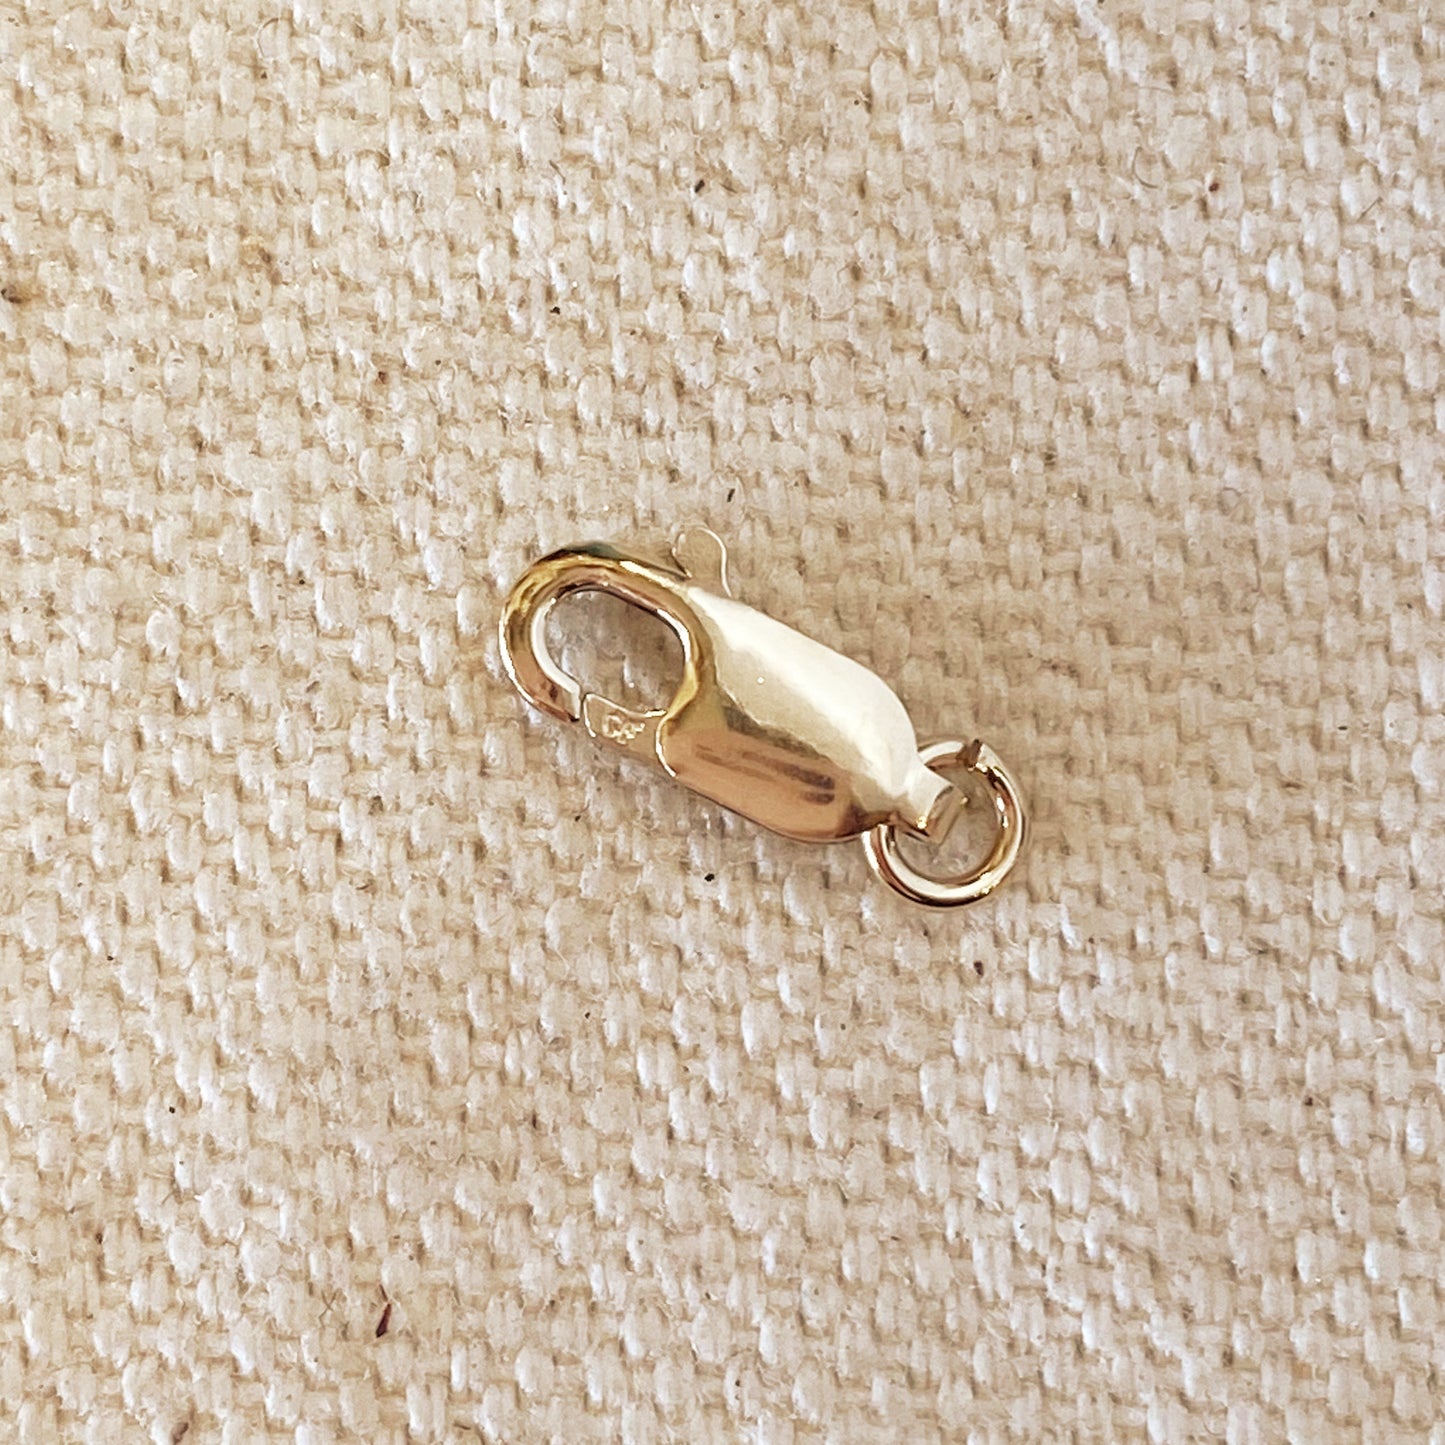 14k Gold Filled Lobster Claw #2 Clasp With Open Ring